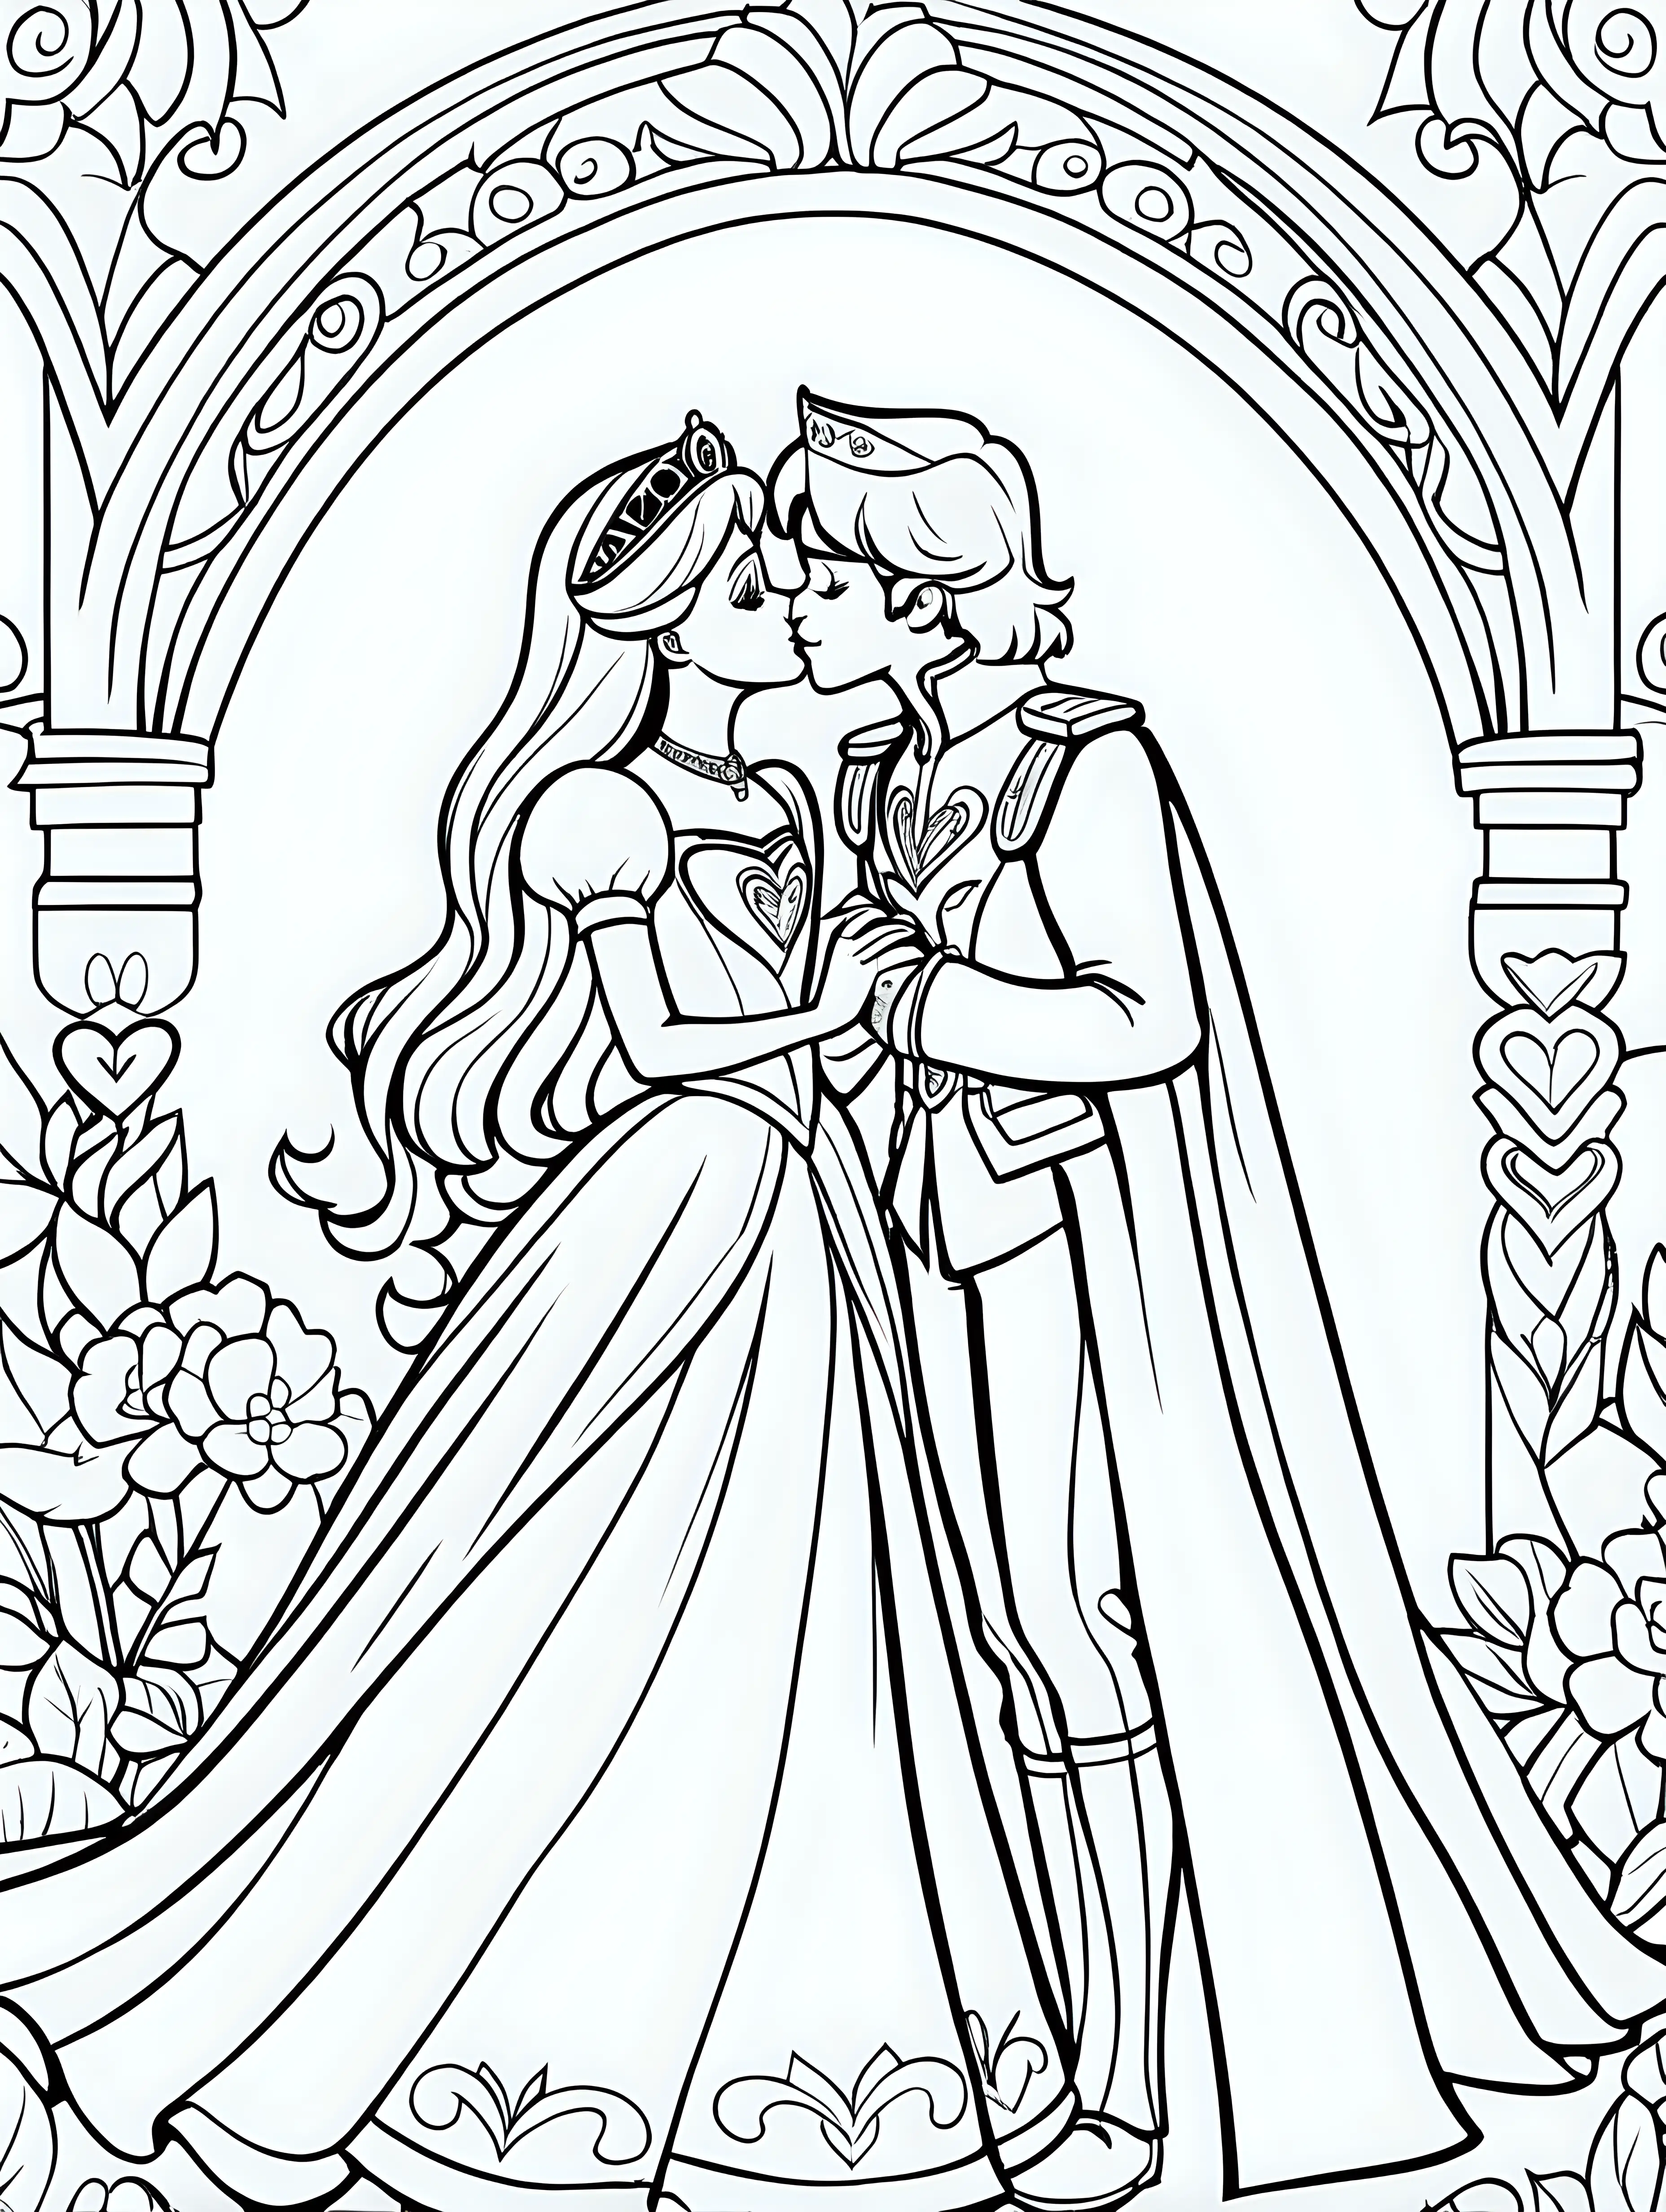 coloring page for kids cute beautiful happy prince and princess couple cute kiss hearts 